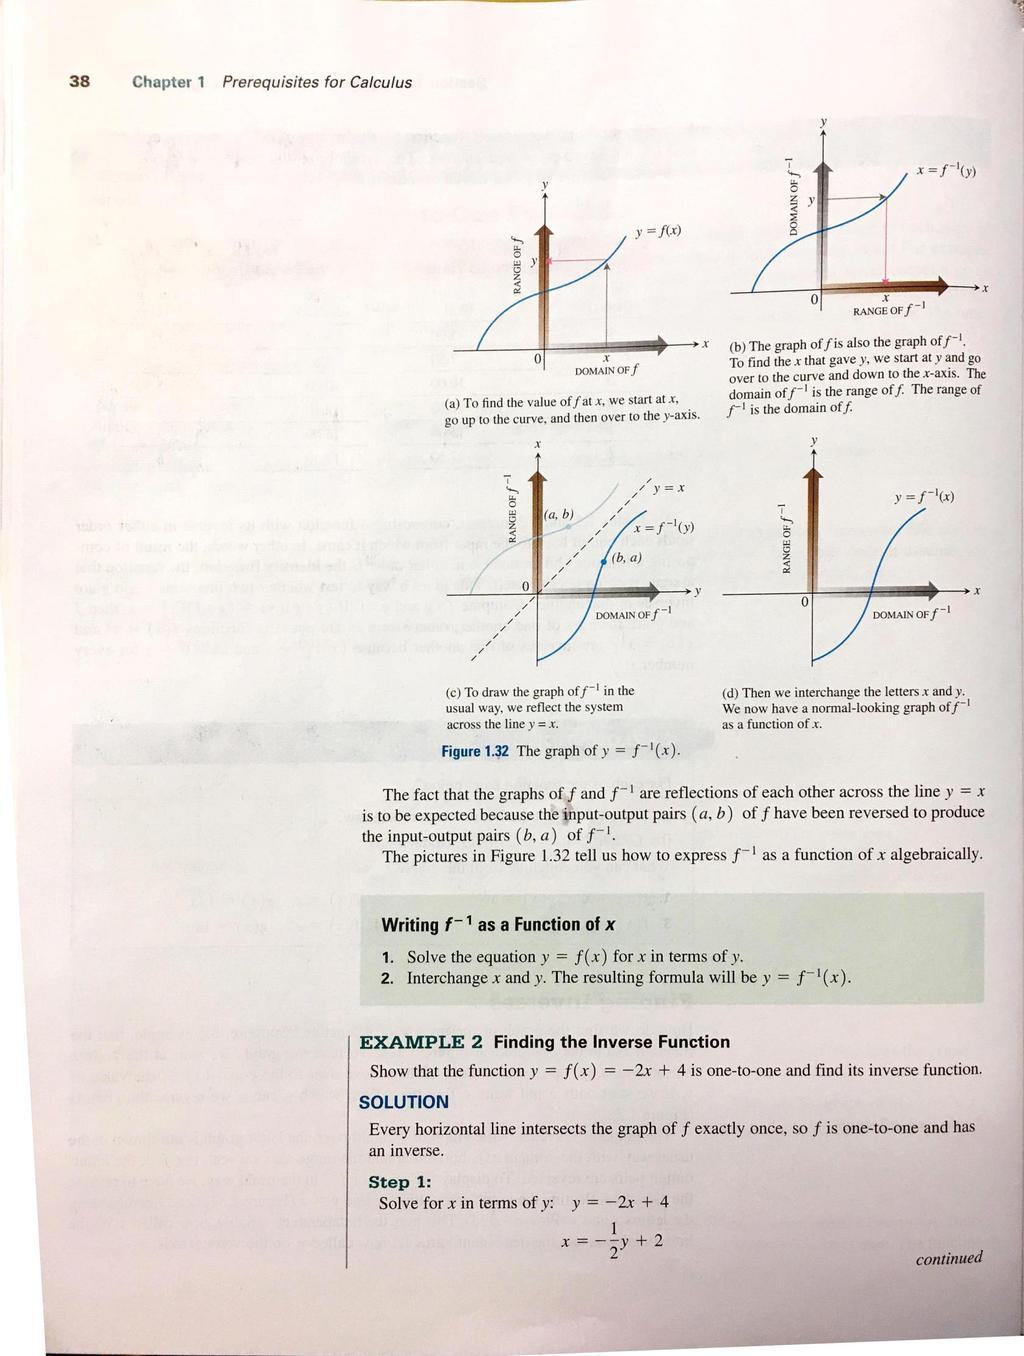 38 Chapter Prerequisites for Calculus 0 - RANGE OFf 0 DOMAIN OFf (a) To find the value off at, we start at, go up to the curve, and then over to the y-ais. (b) The graph offis also the graph off -I.